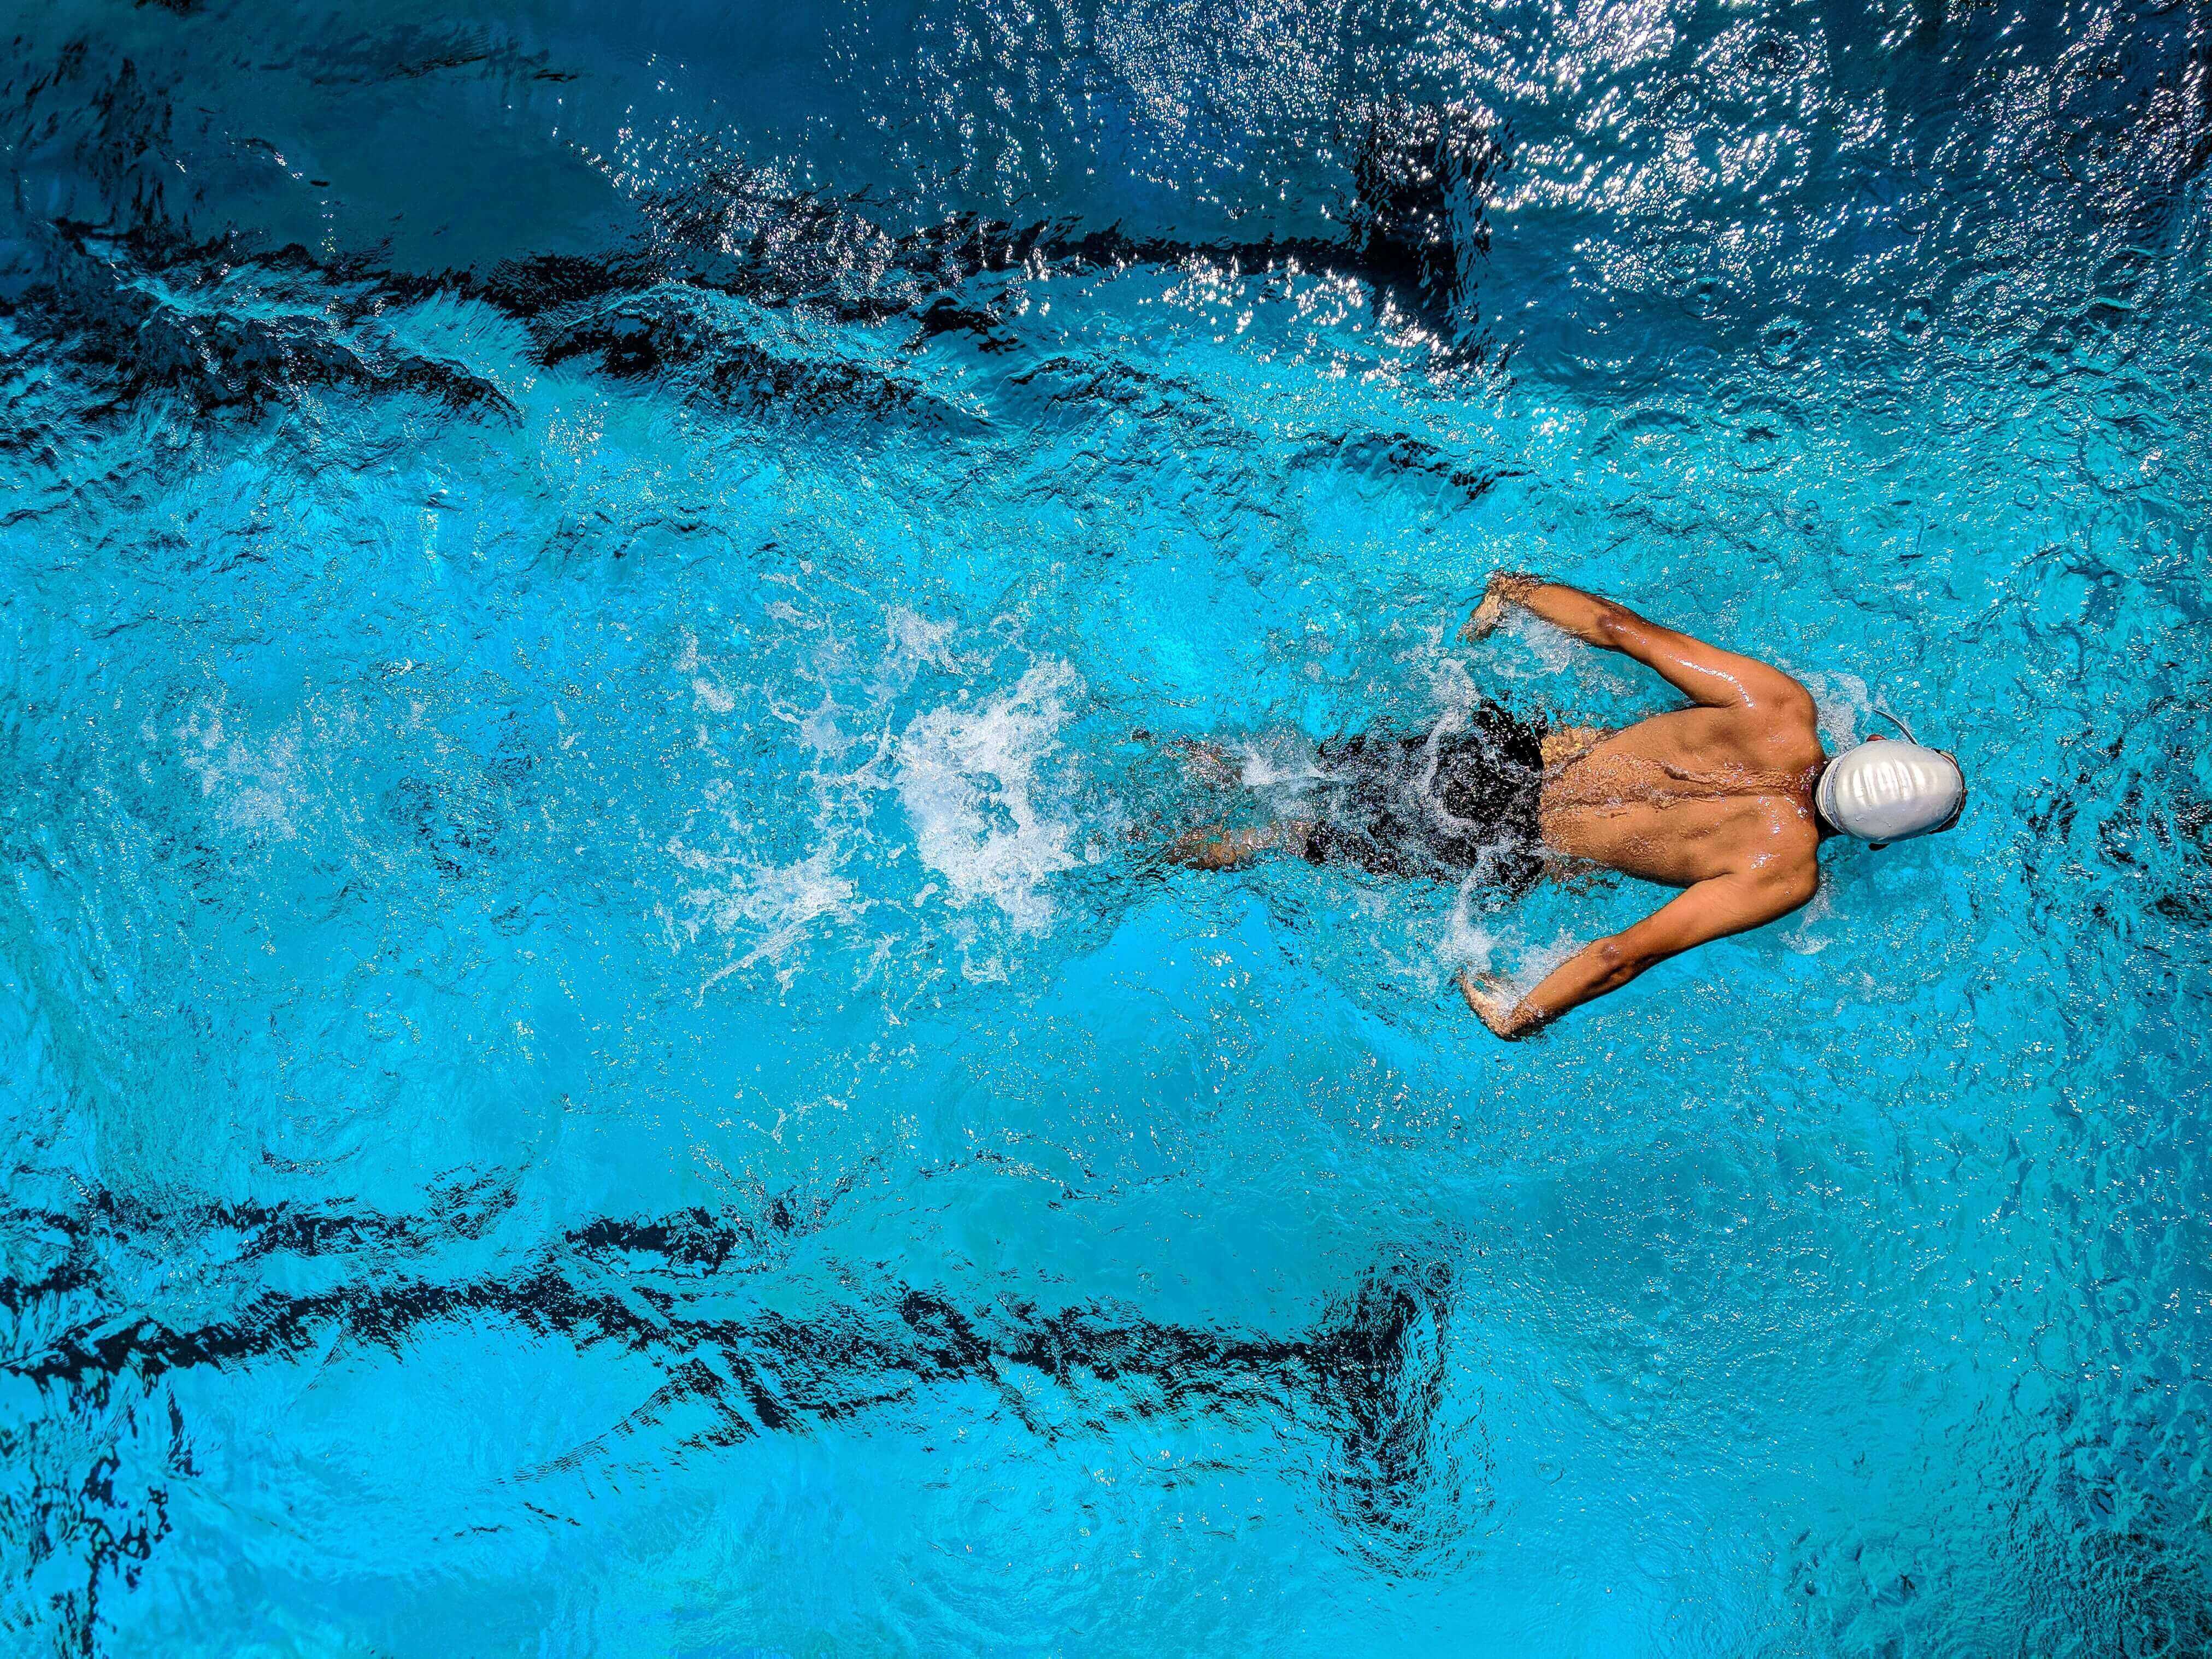 An athlete gliding powerfully through a swimming pool, strong and injury free thanks to Revive compression therapy.